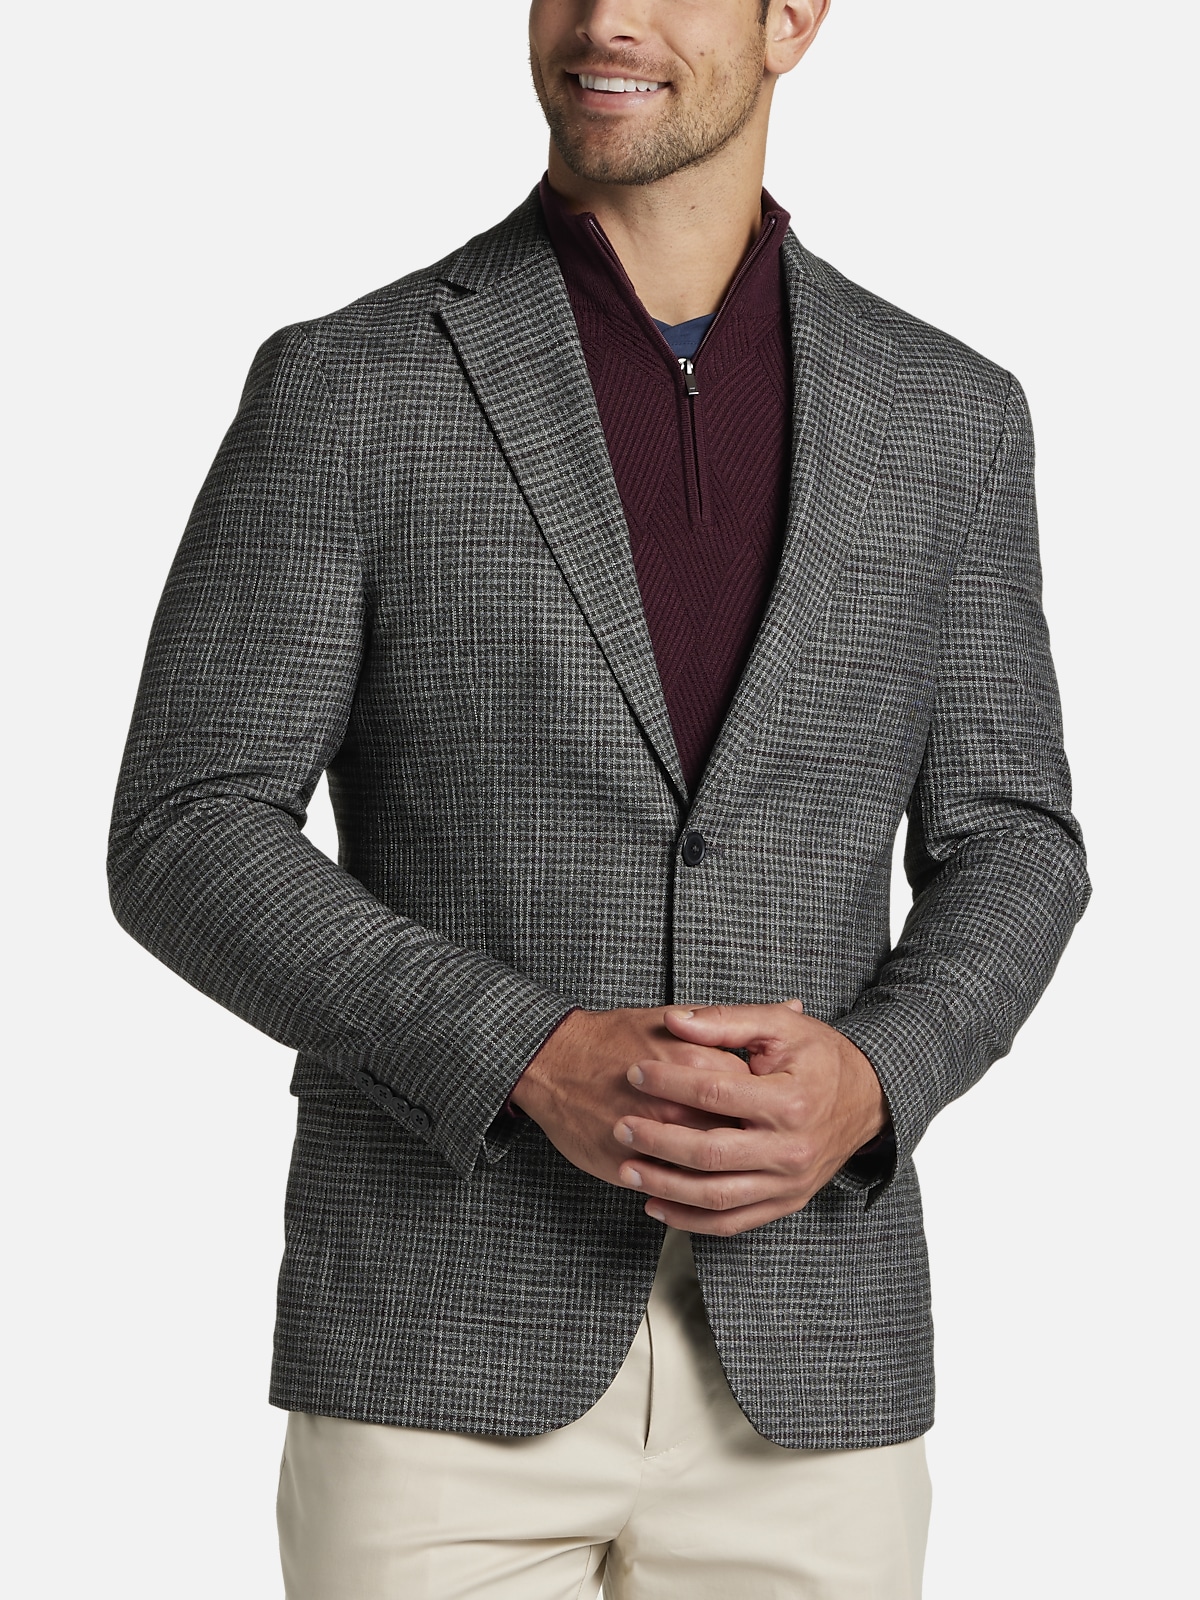 Michael Strahan Classic Fit Plaid Sport Coat | All Clearance $39.99 ...